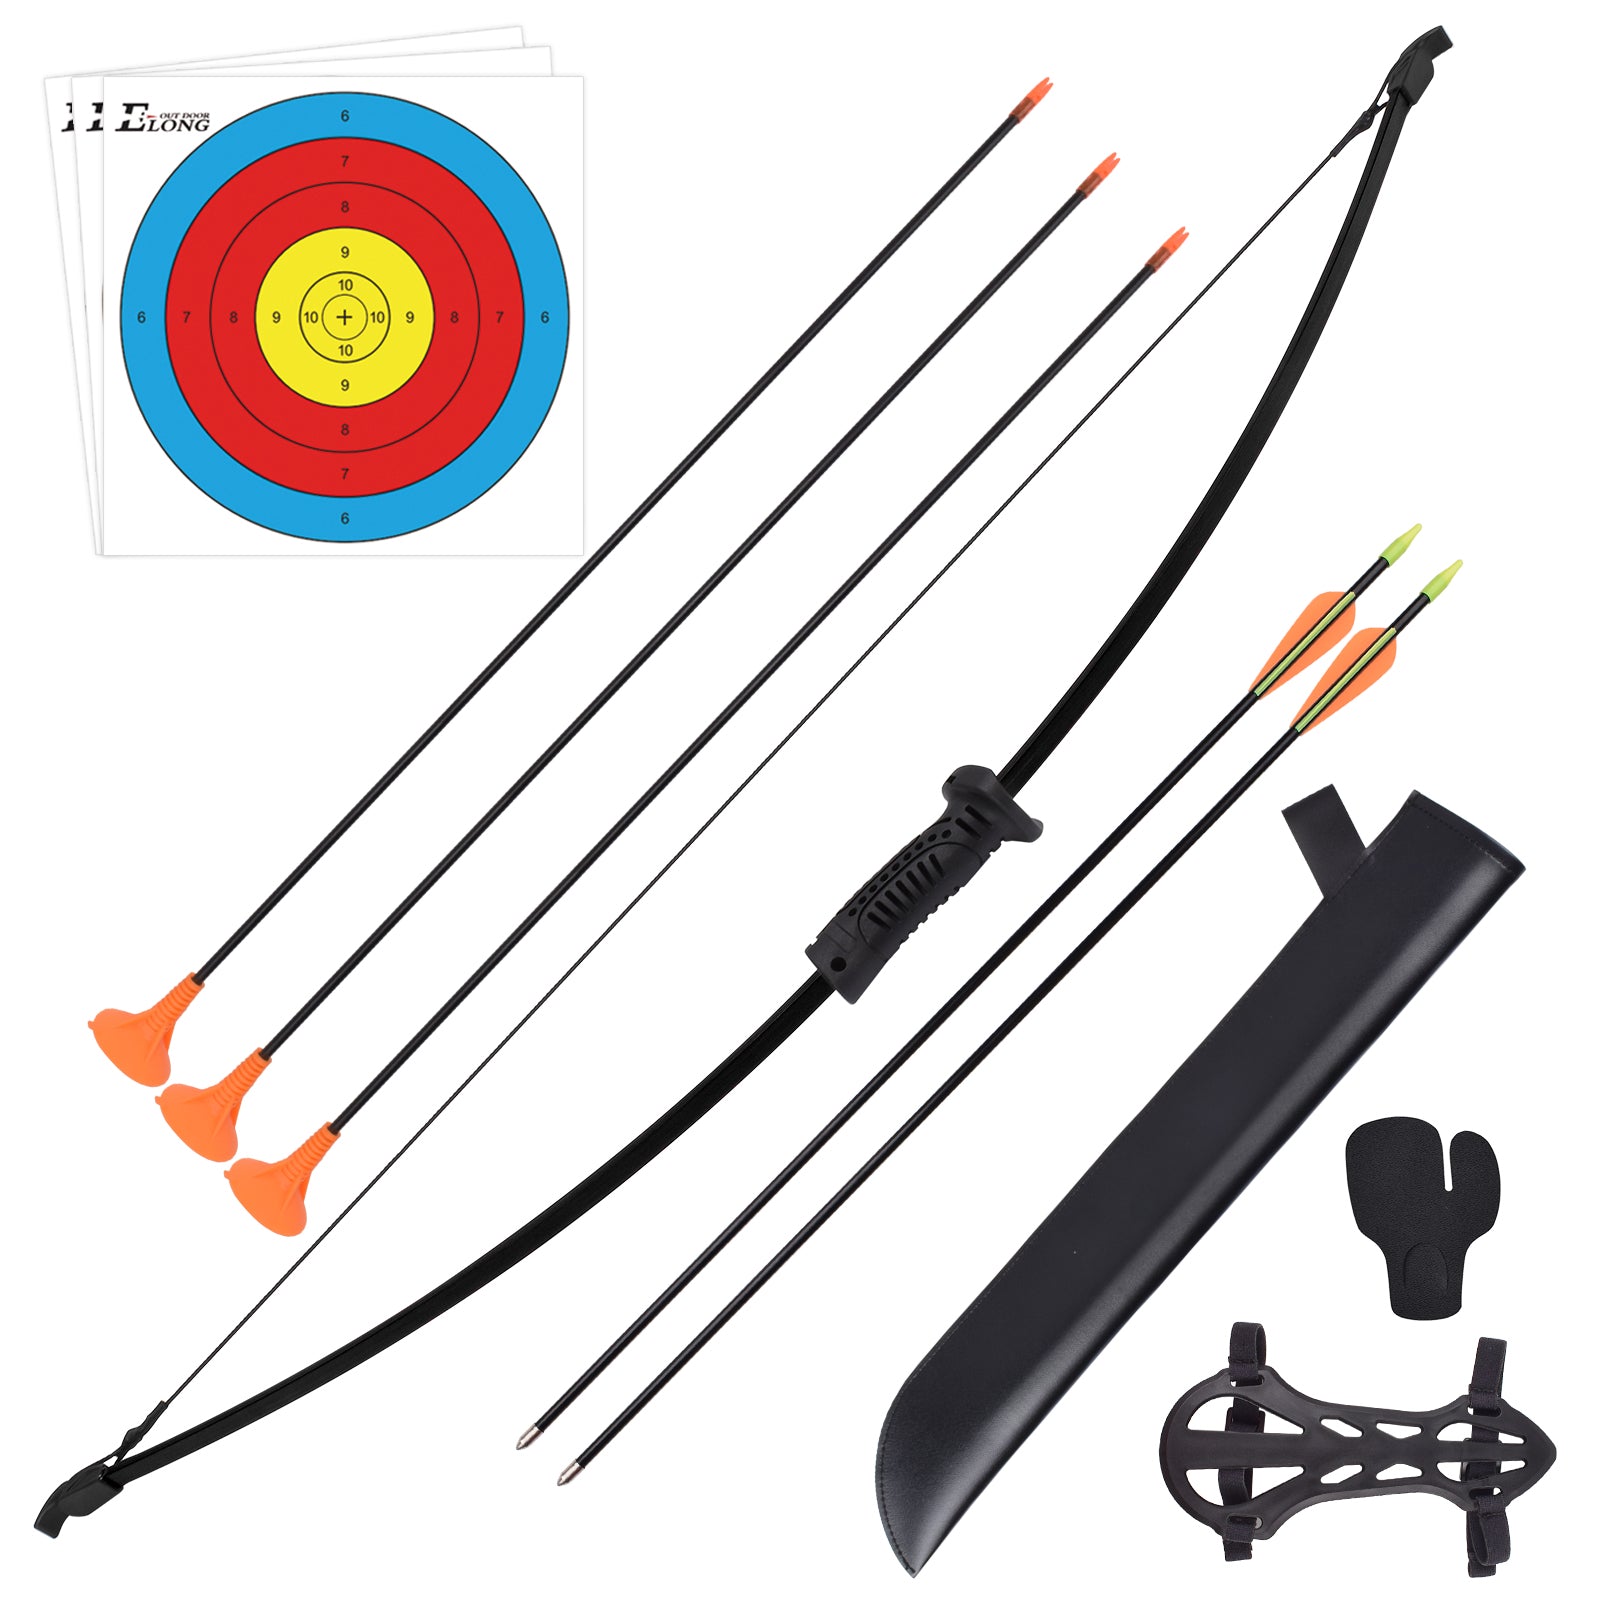 Archery Recurve Bow and Arrow Set with Sucker Arrow for Youth Children Junior Beginner